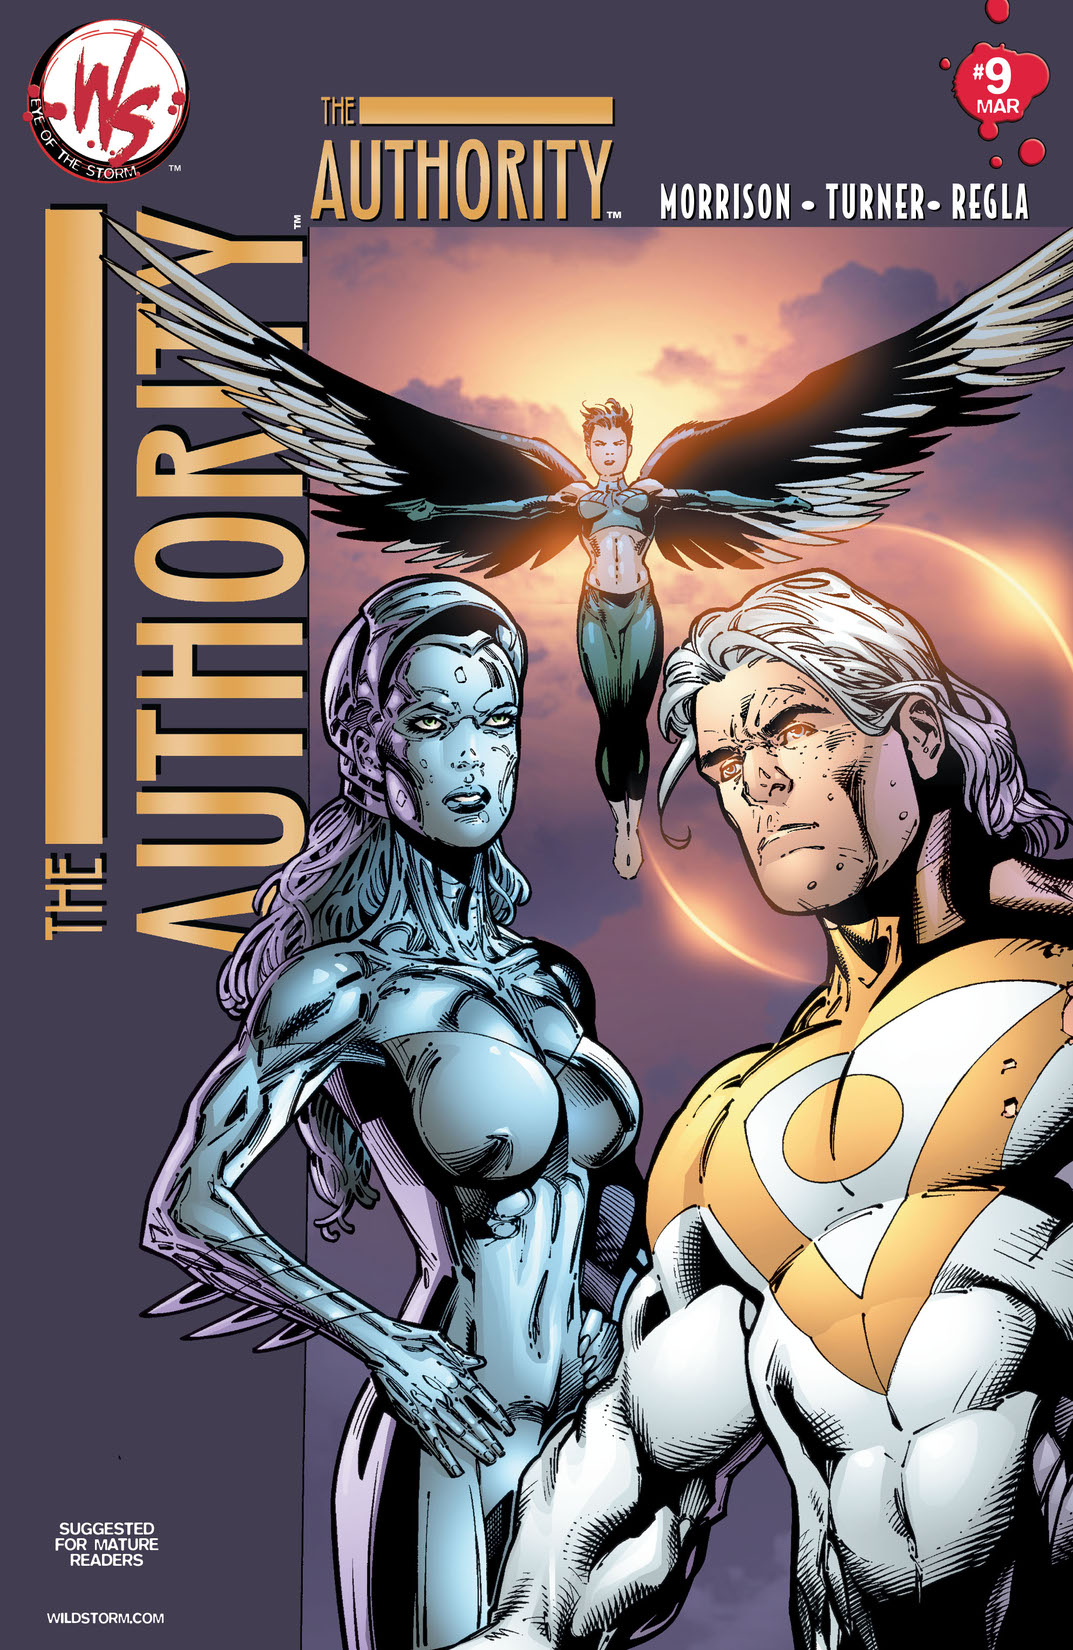 The Authority (2003-2004) #9 preview images